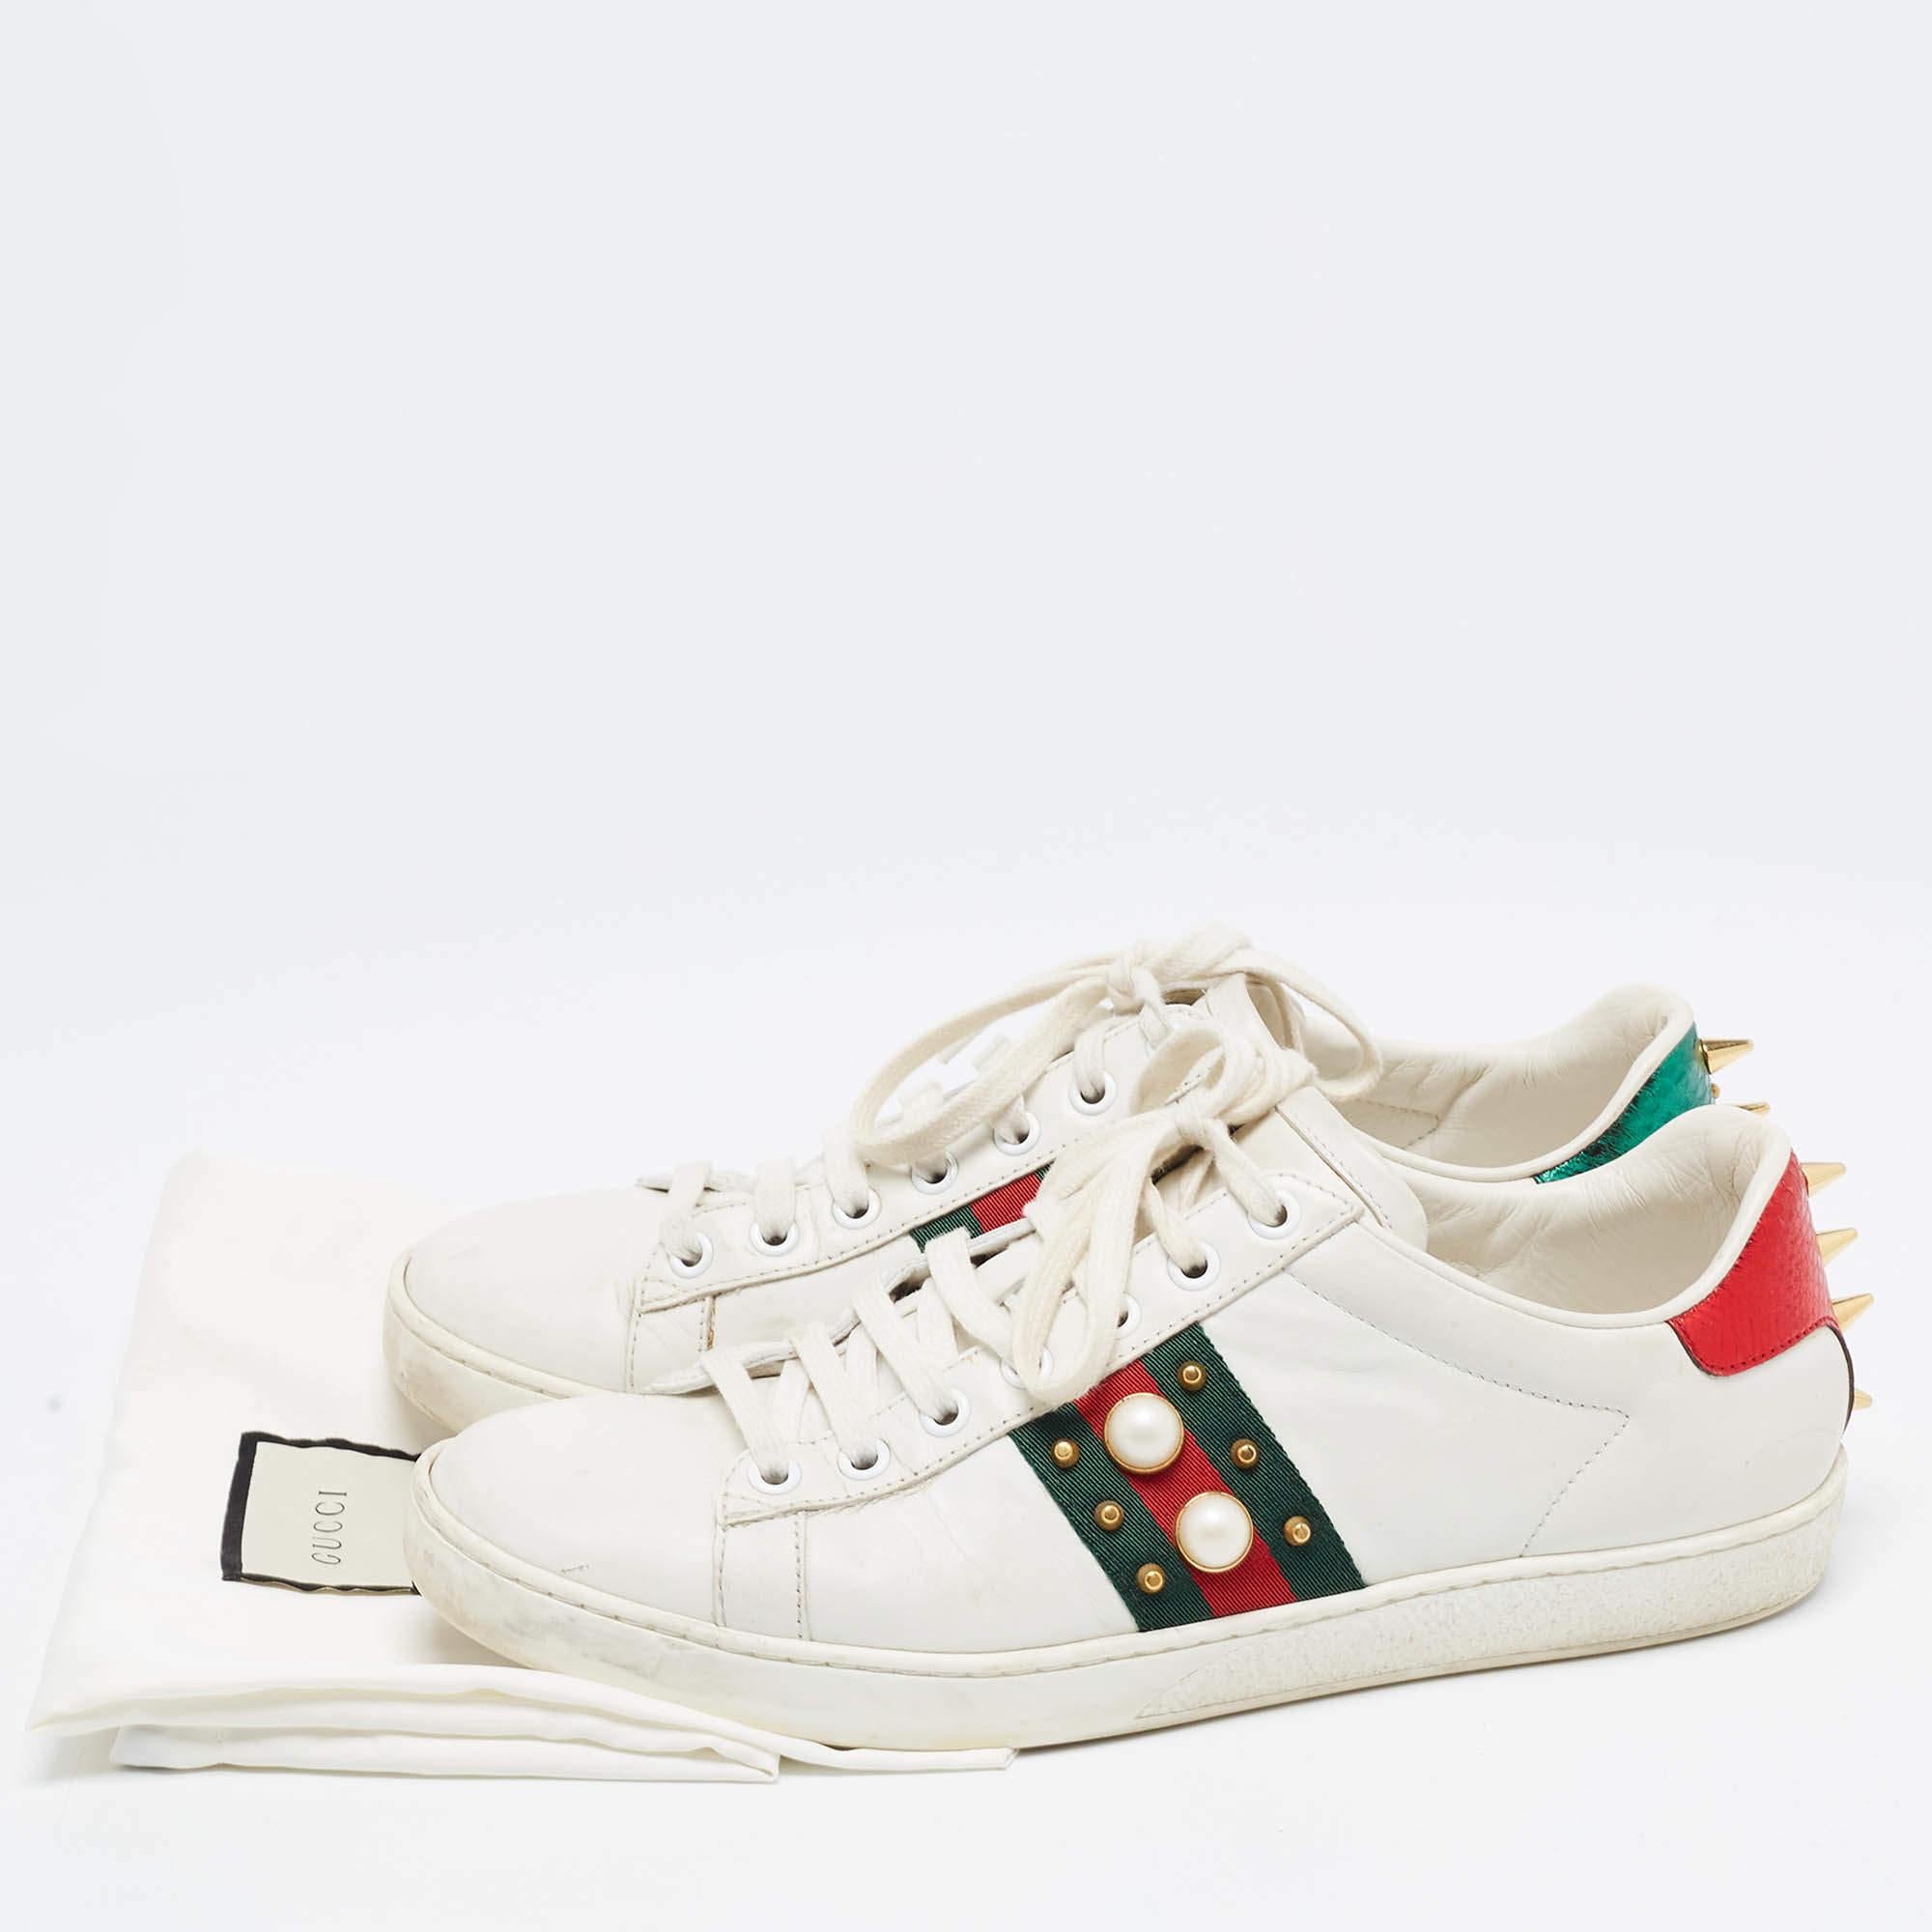 Women's Gucci White Leather Faux Pearl and Spike Embellished Ace Sneakers Size 38.5